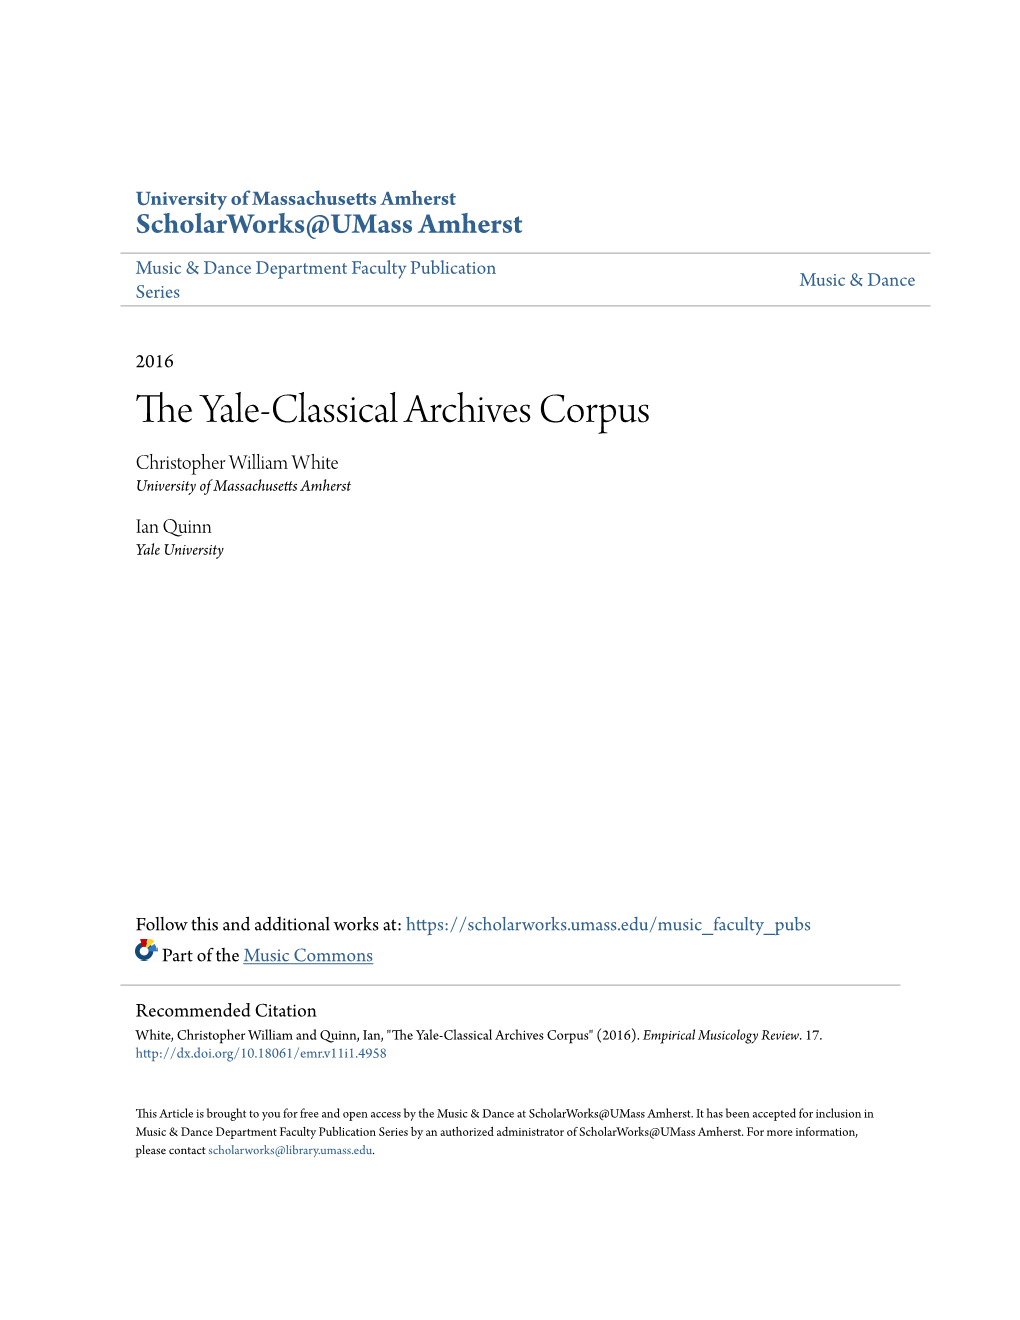 The Yale-Classical Archives Corpus